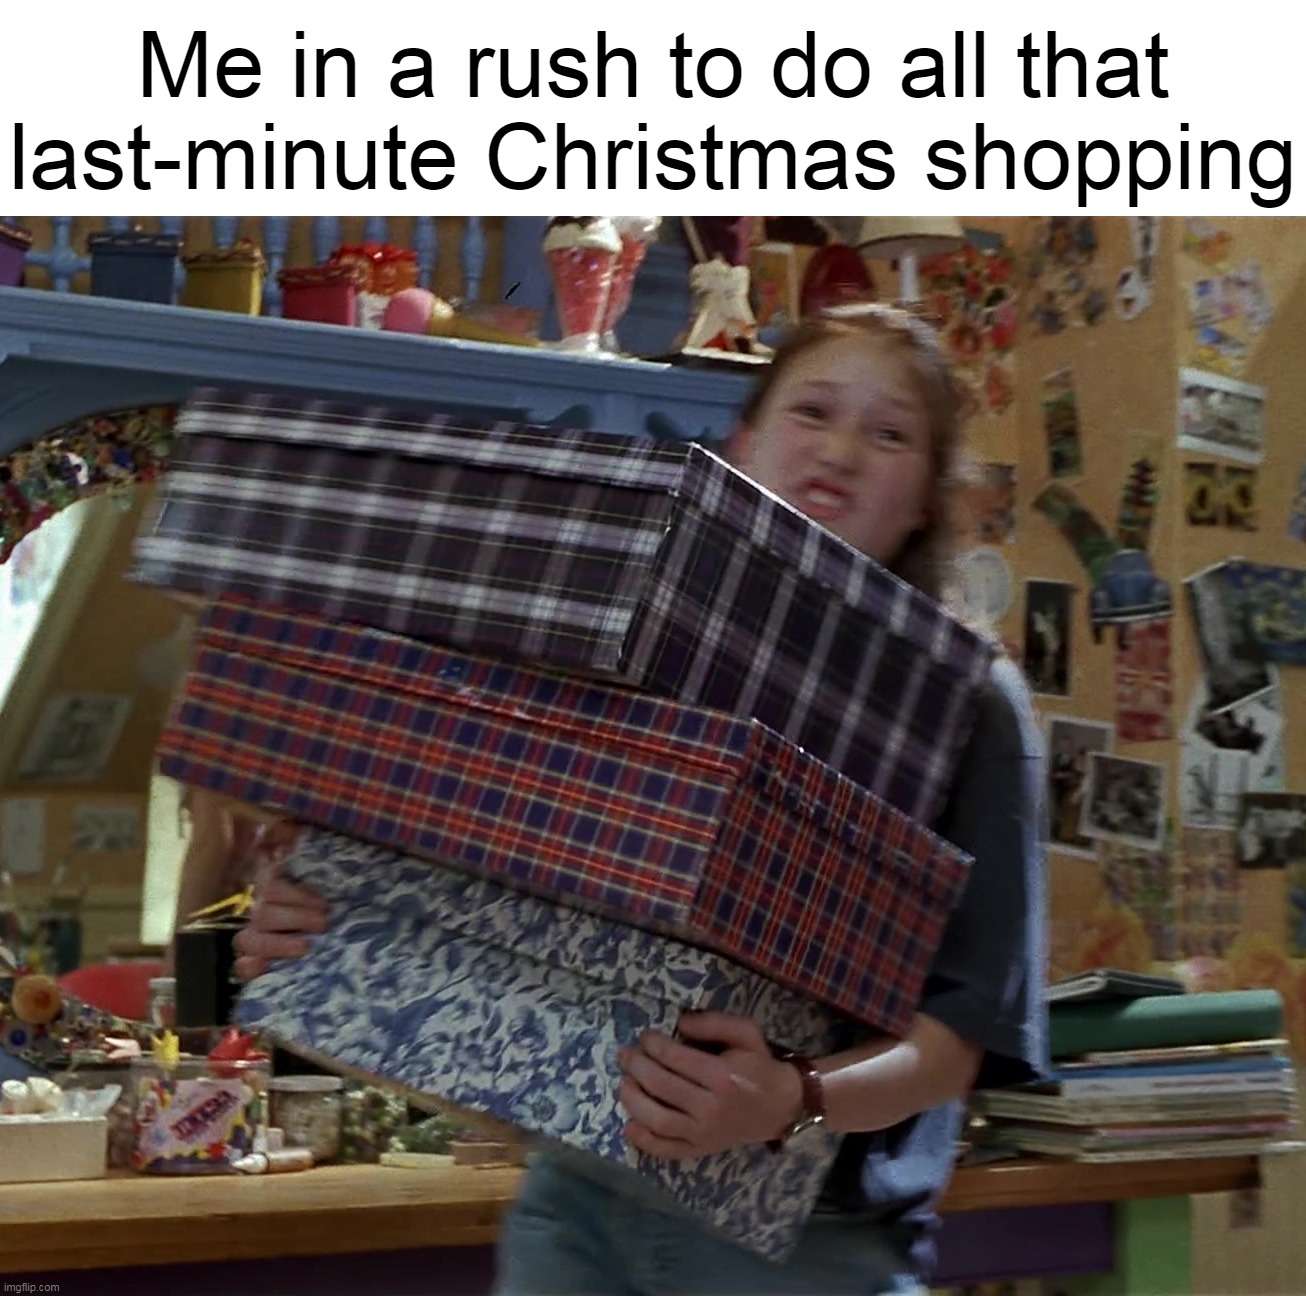 Me in a rush to do all that last-minute Christmas shopping | image tagged in meme,memes,humor,christmas,relatable,funny | made w/ Imgflip meme maker